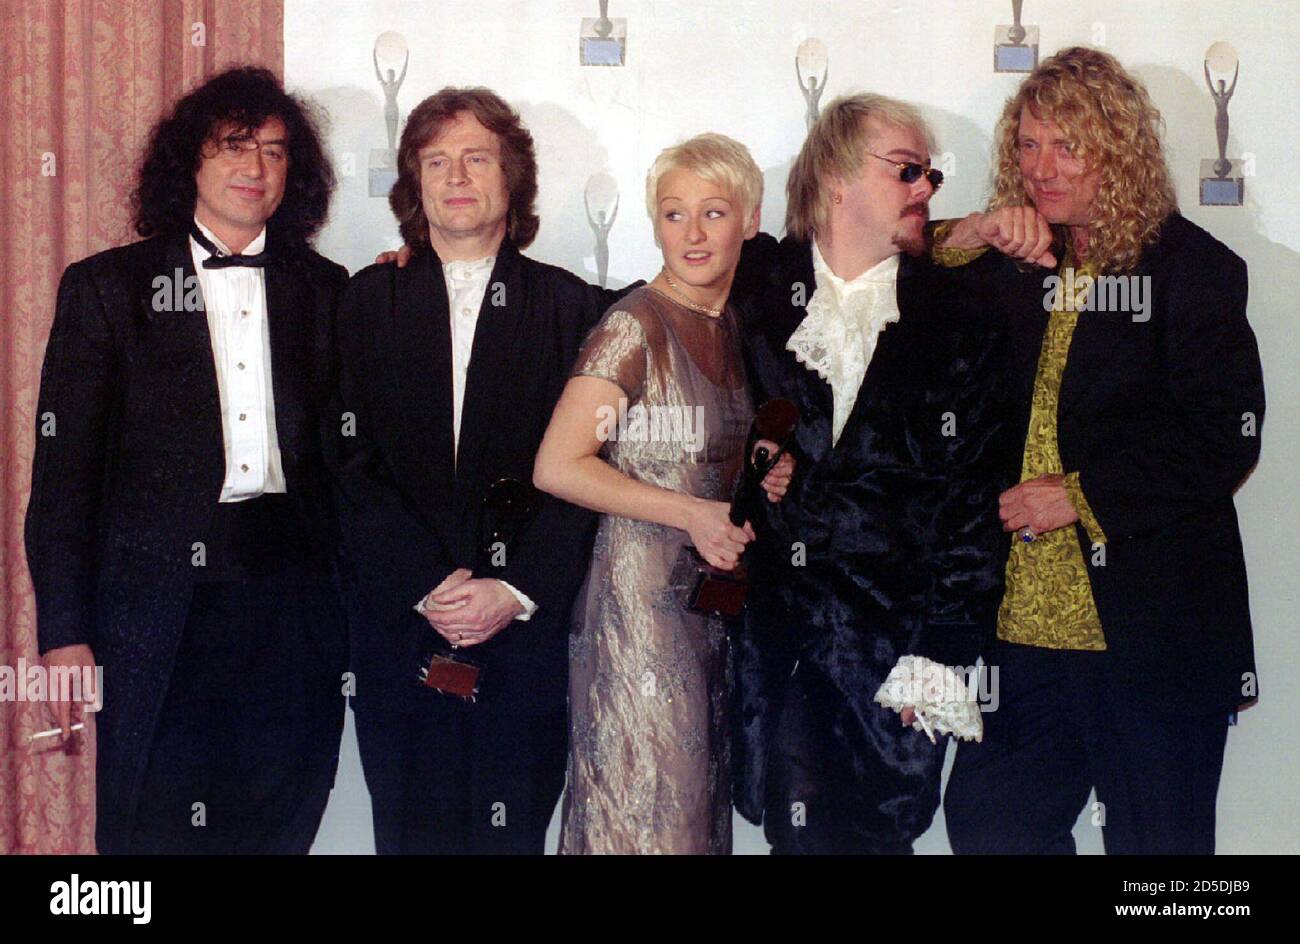 Members of the rock band Led Zeppelin, from left, Jimmy Page, John Paul Jones and Robert Plant (far right) pose with Jason and Zoe Bonham, the children of late band member John Bonham, (center right) after the band was inducted into the Rock and Roll Hall of Fame in New York January 13 Stock Photo